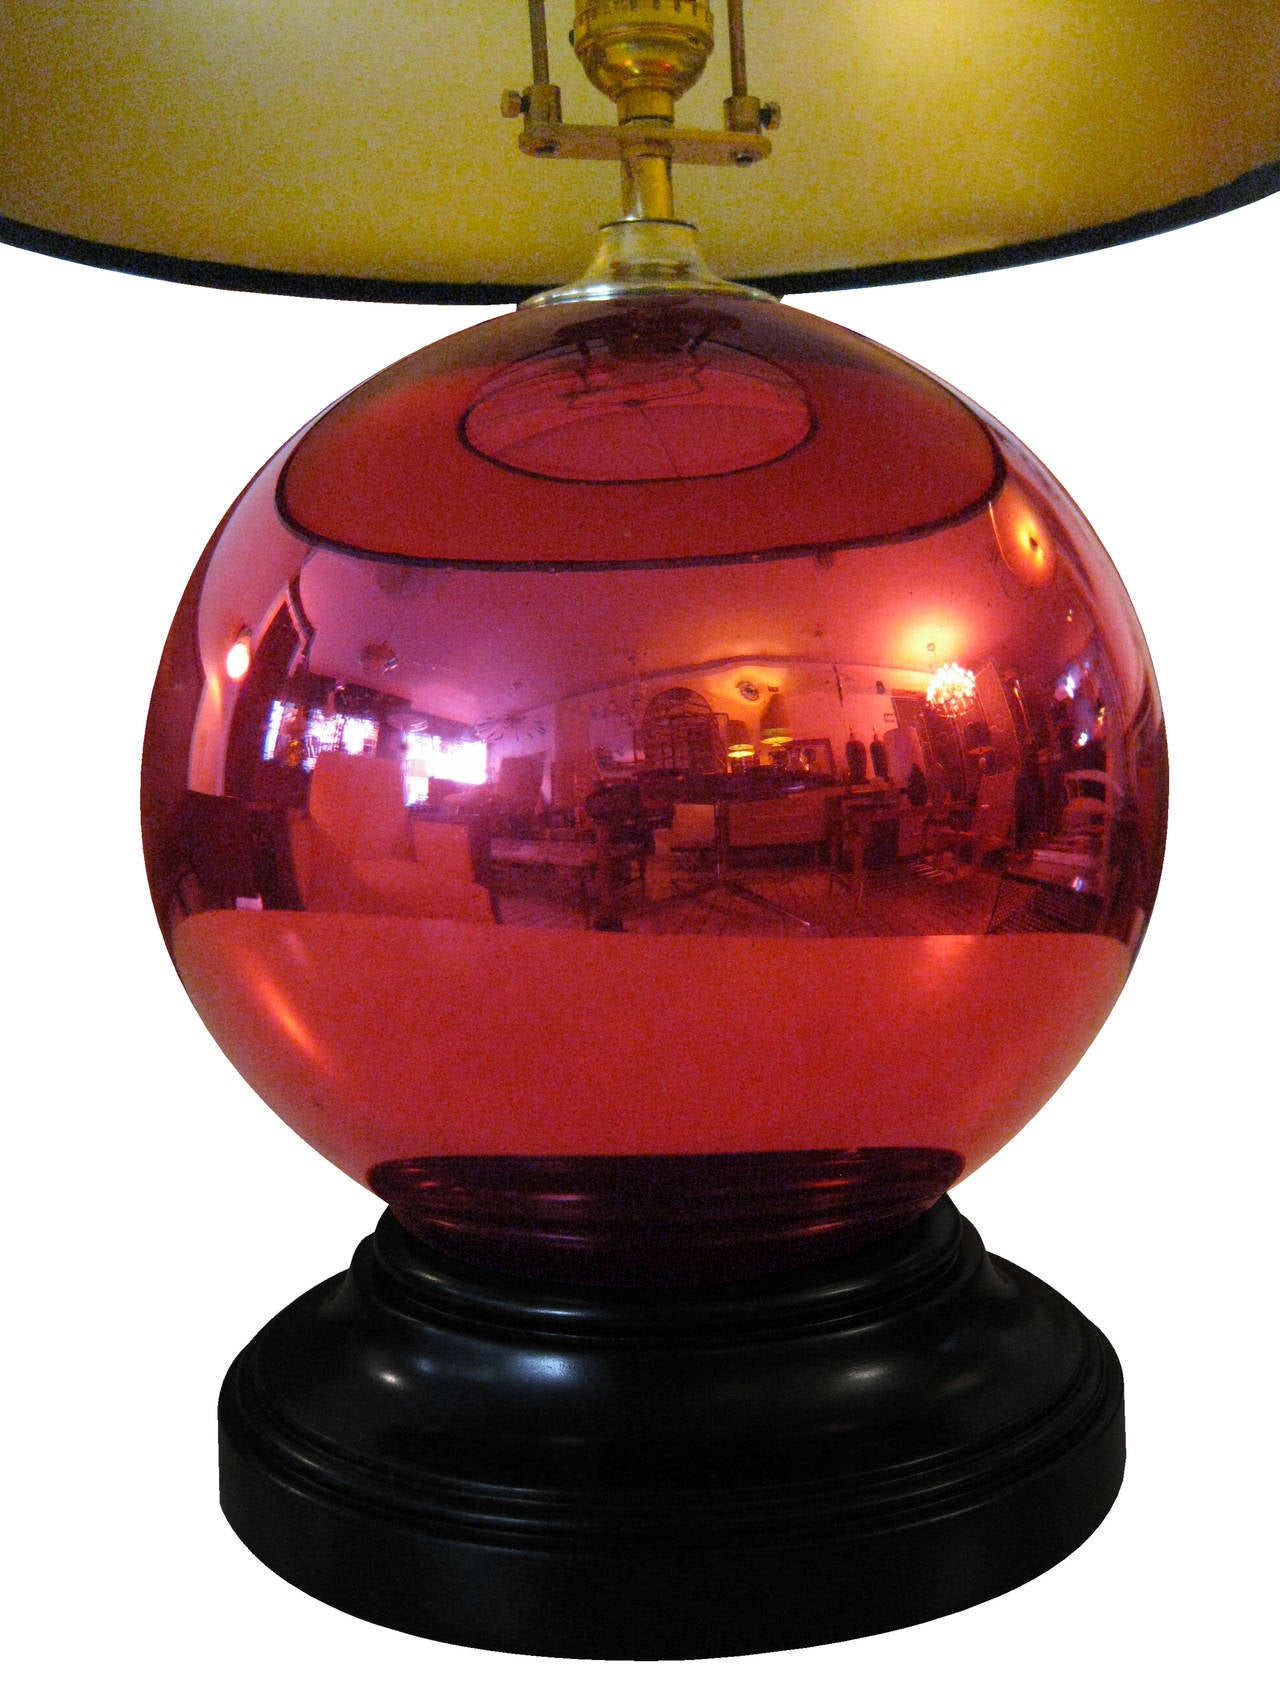 Pair of table lamps with black-lacquered mahogany bases supporting two blown-glass spheres of ruby mercury. Manufactured in Tonala, Jalisco, circa 1940. These lamps retain ALL of their original brass parts, topped with subtle shades of